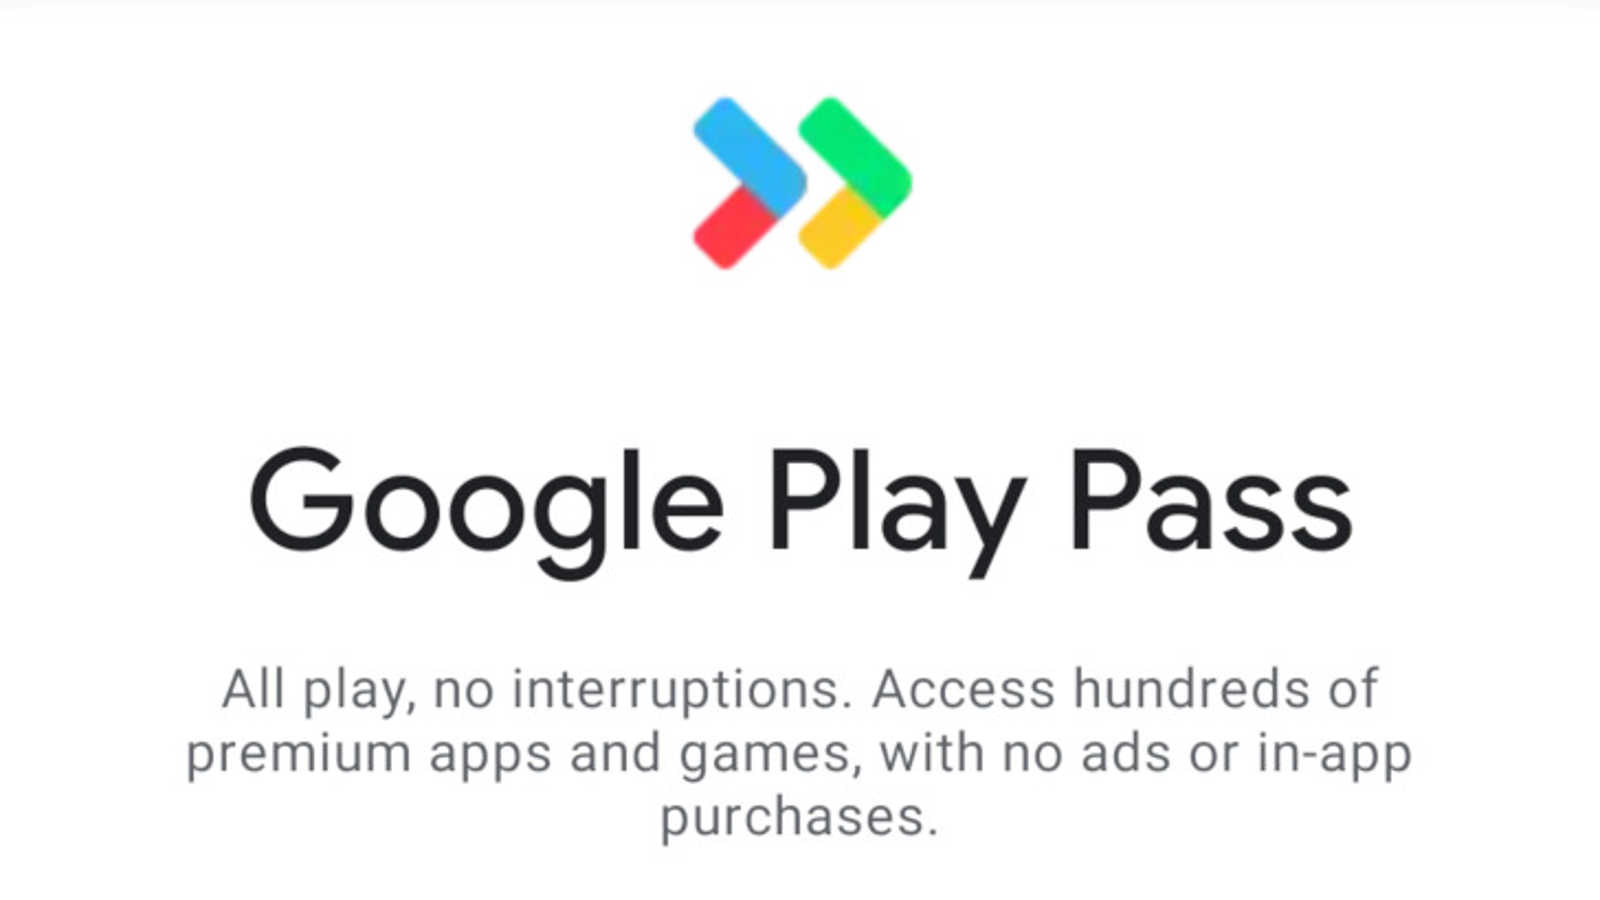 Google Play Pass: new apps, games, plans and availability